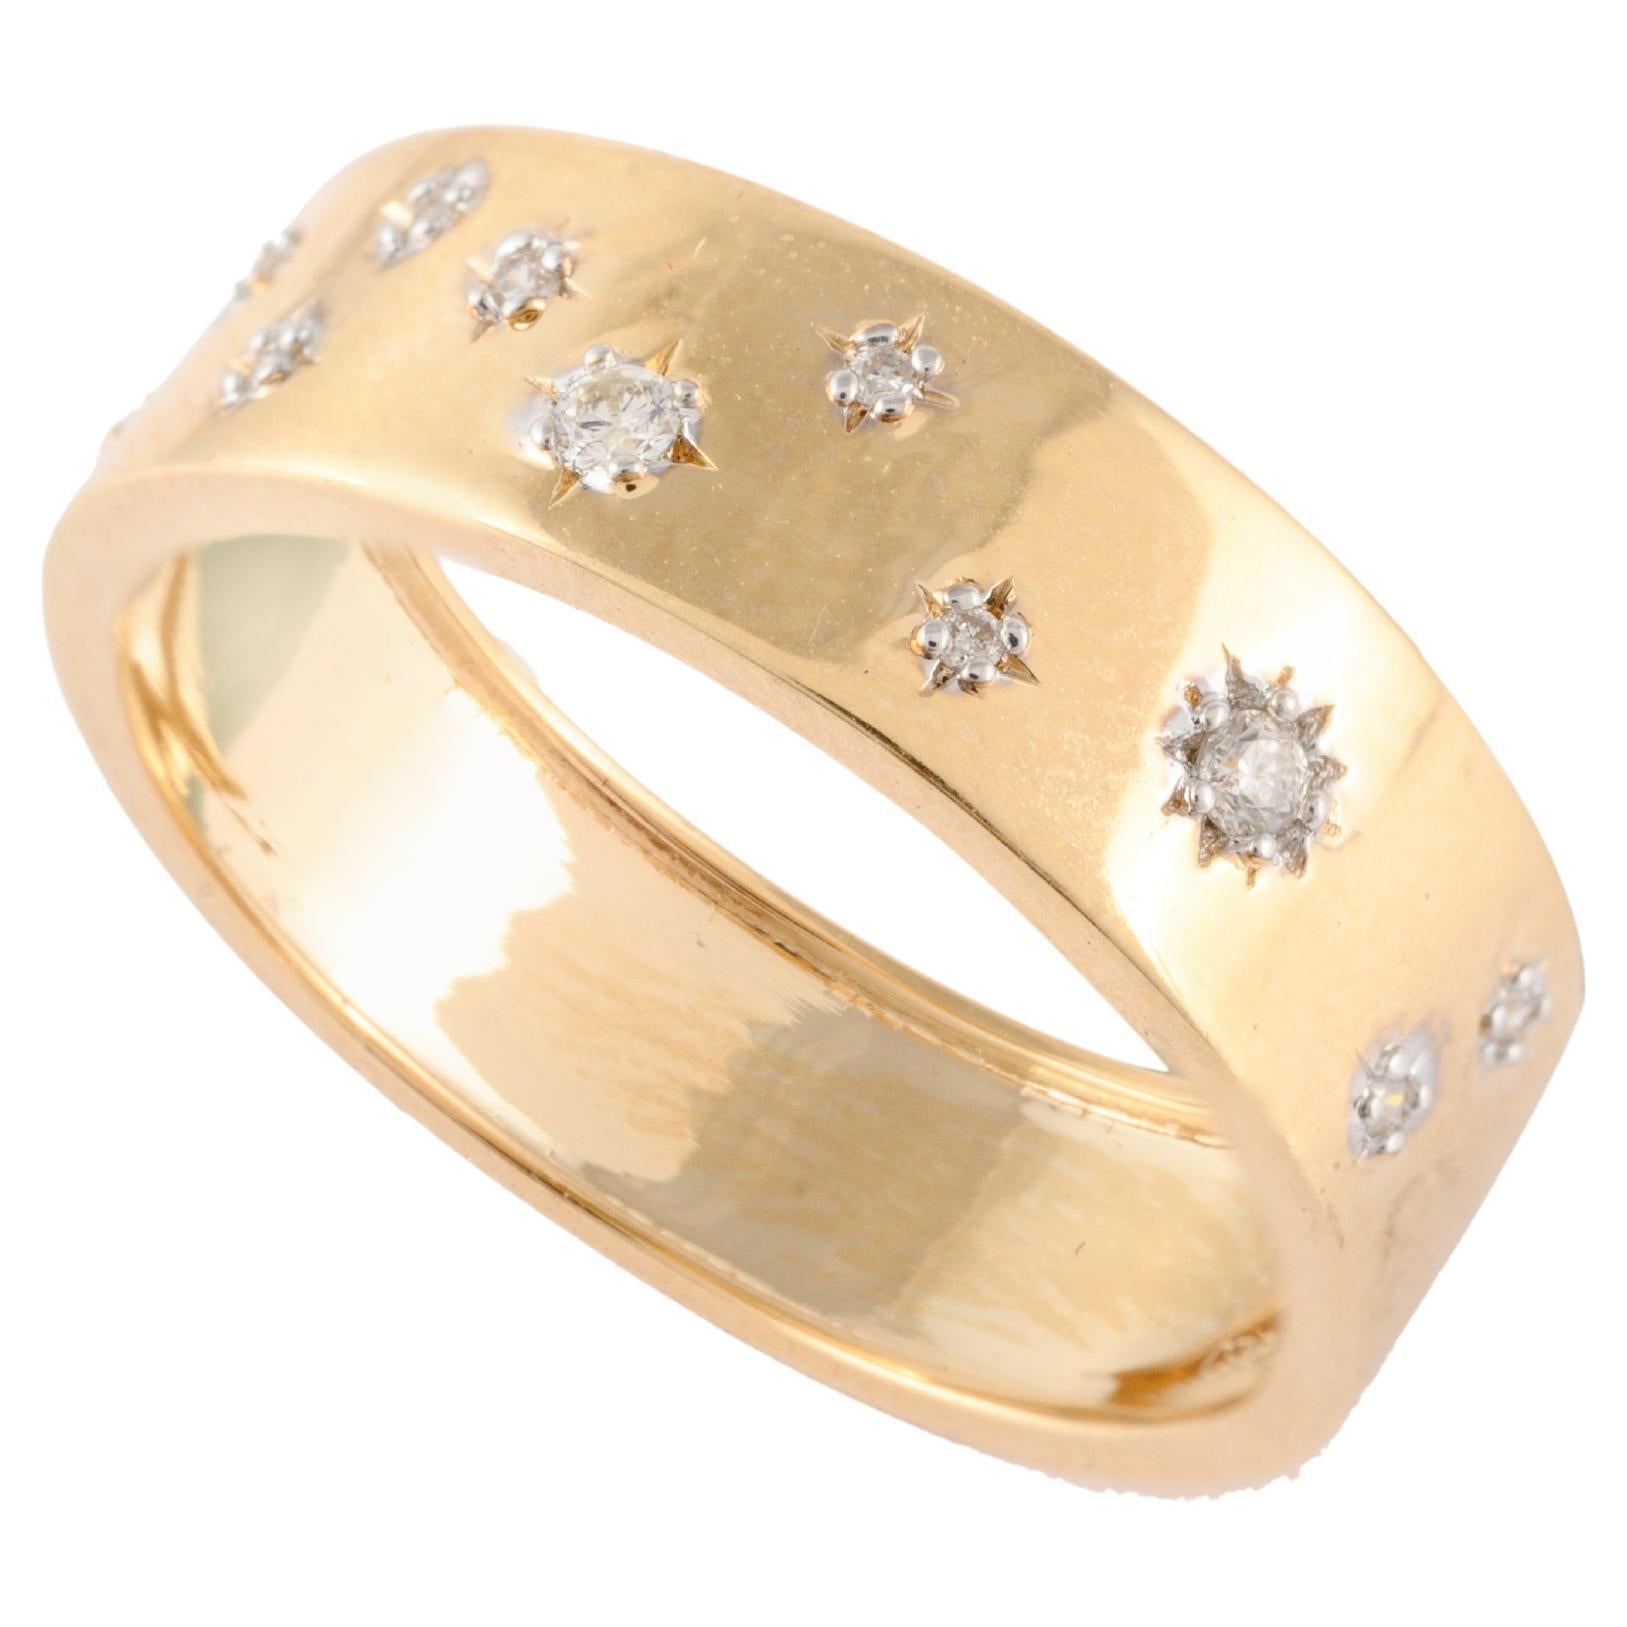 For Sale:  Genuine Diamond Stardust Unisex Band Ring in 18k Solid Yellow Gold